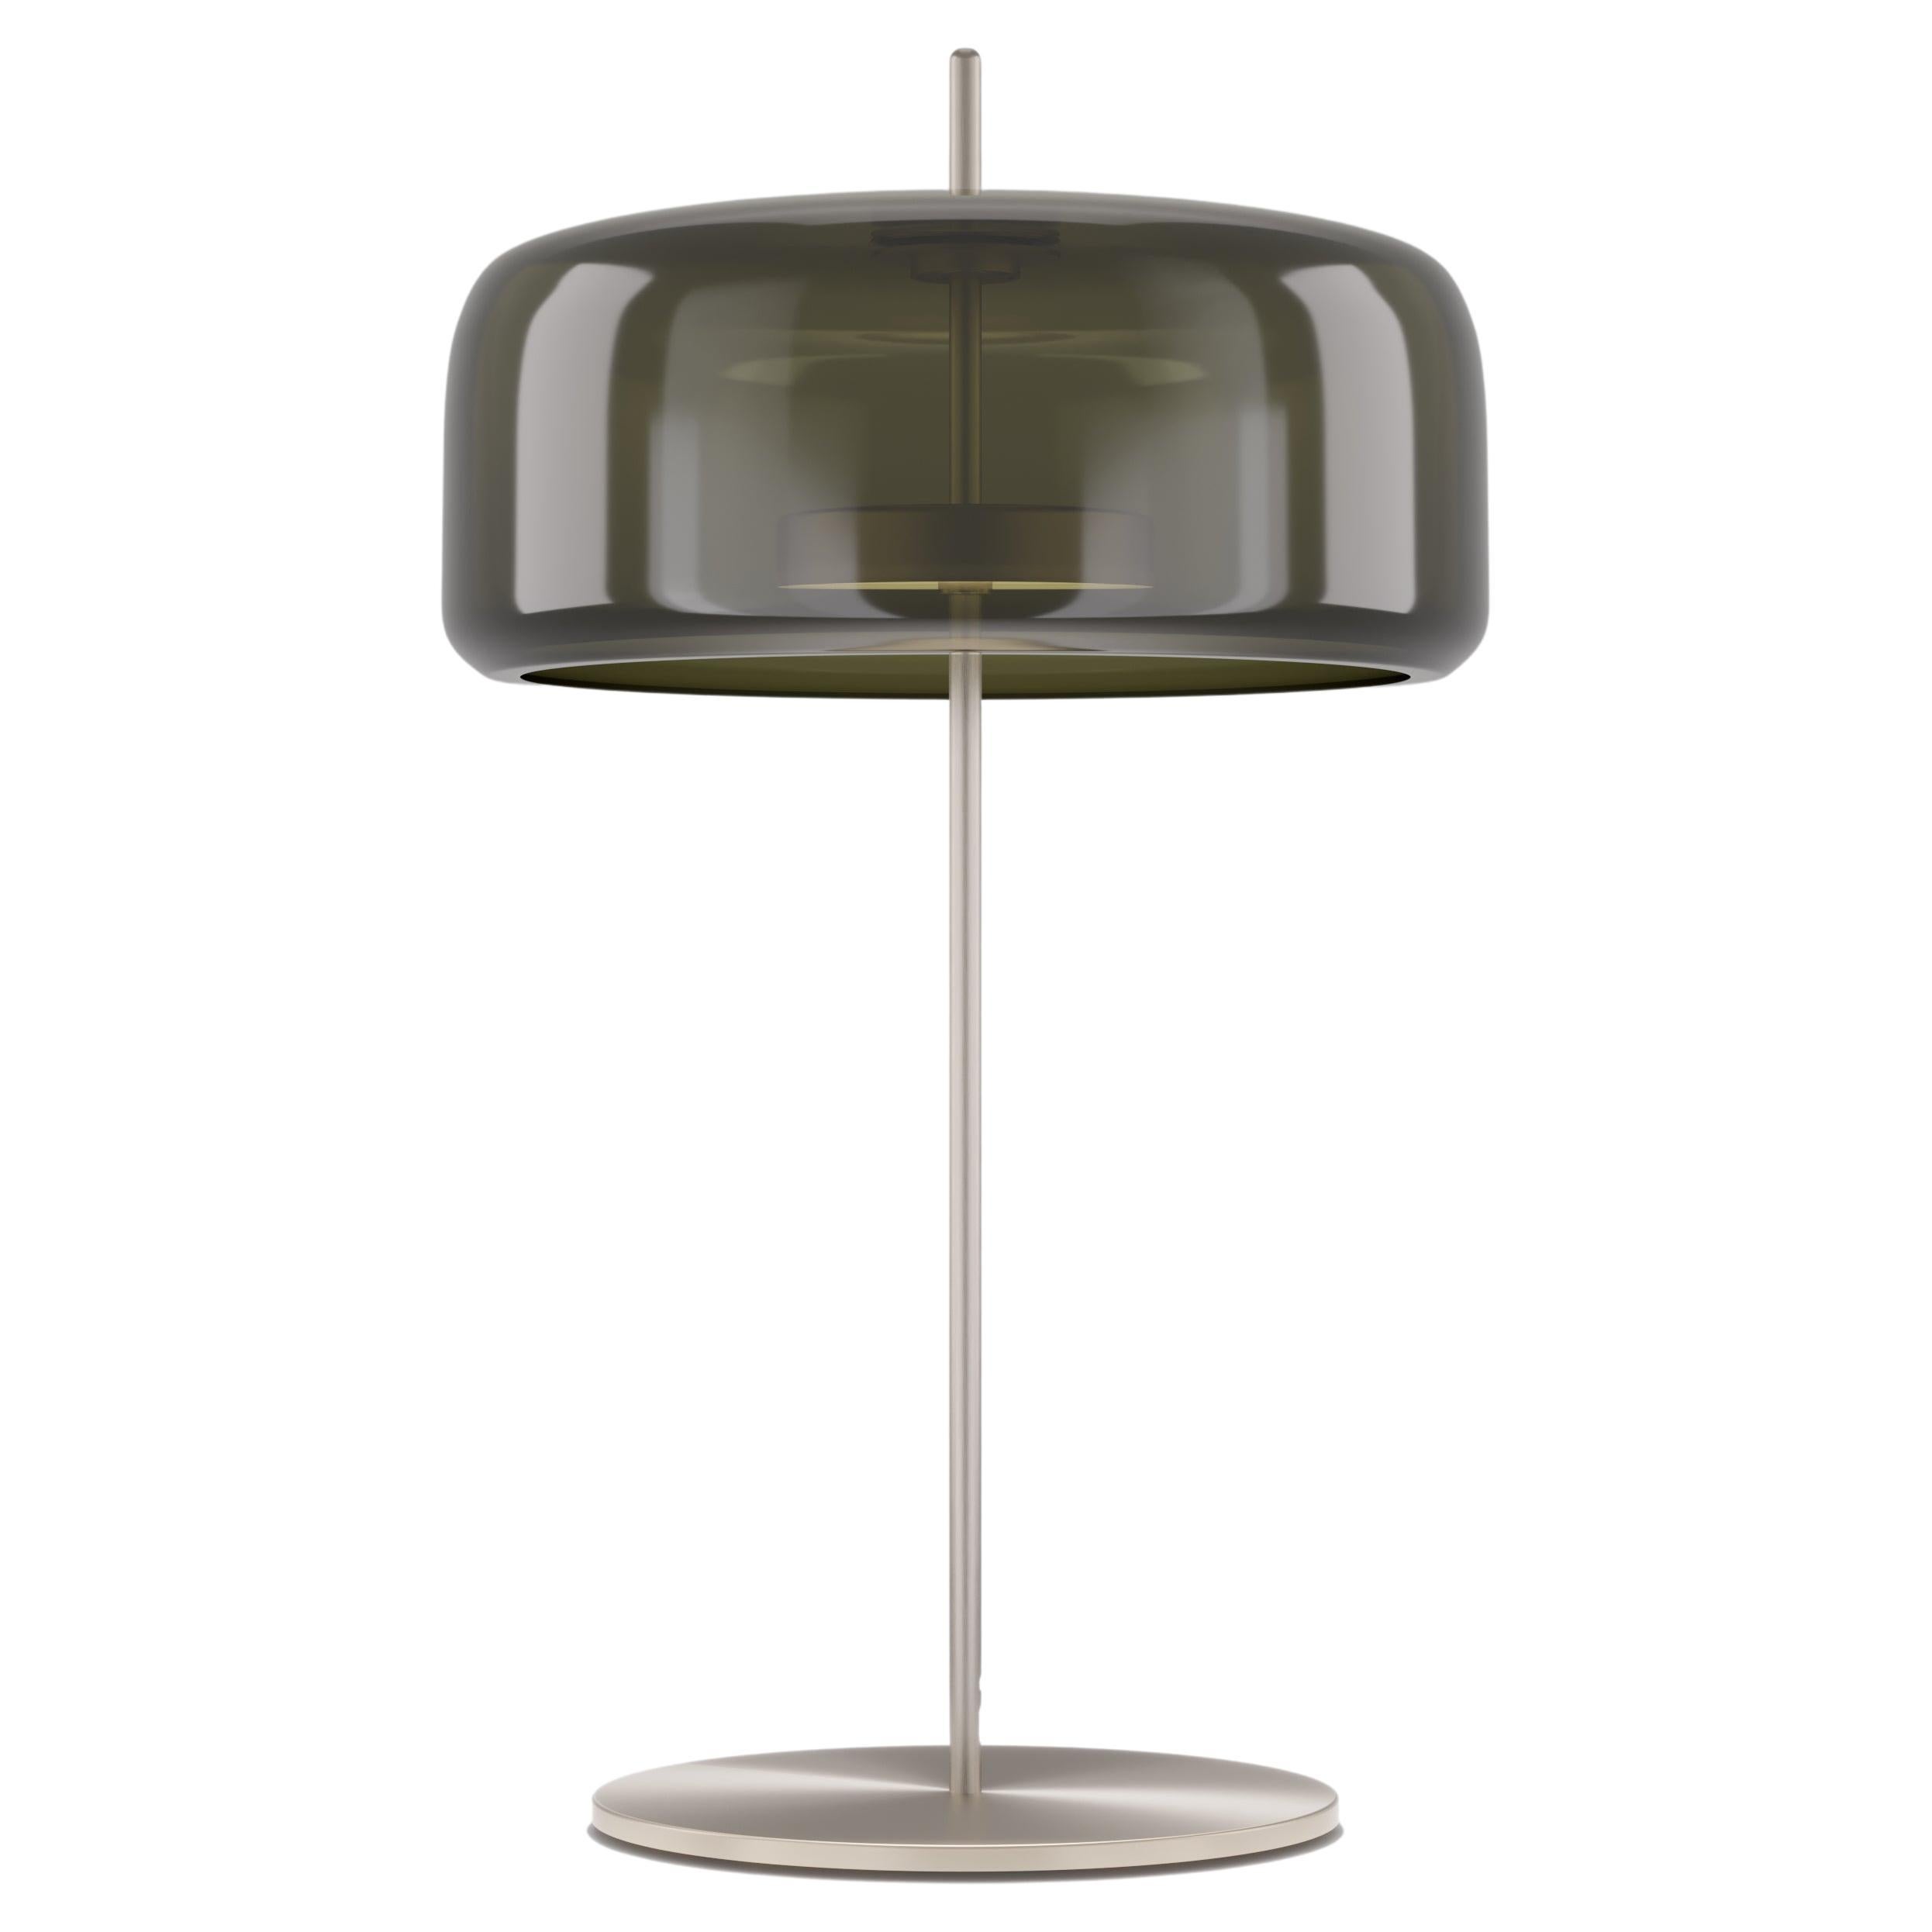 Vistosi Jube Table Lamp in Old Green Transparent Glass And Matt Steel Finish For Sale